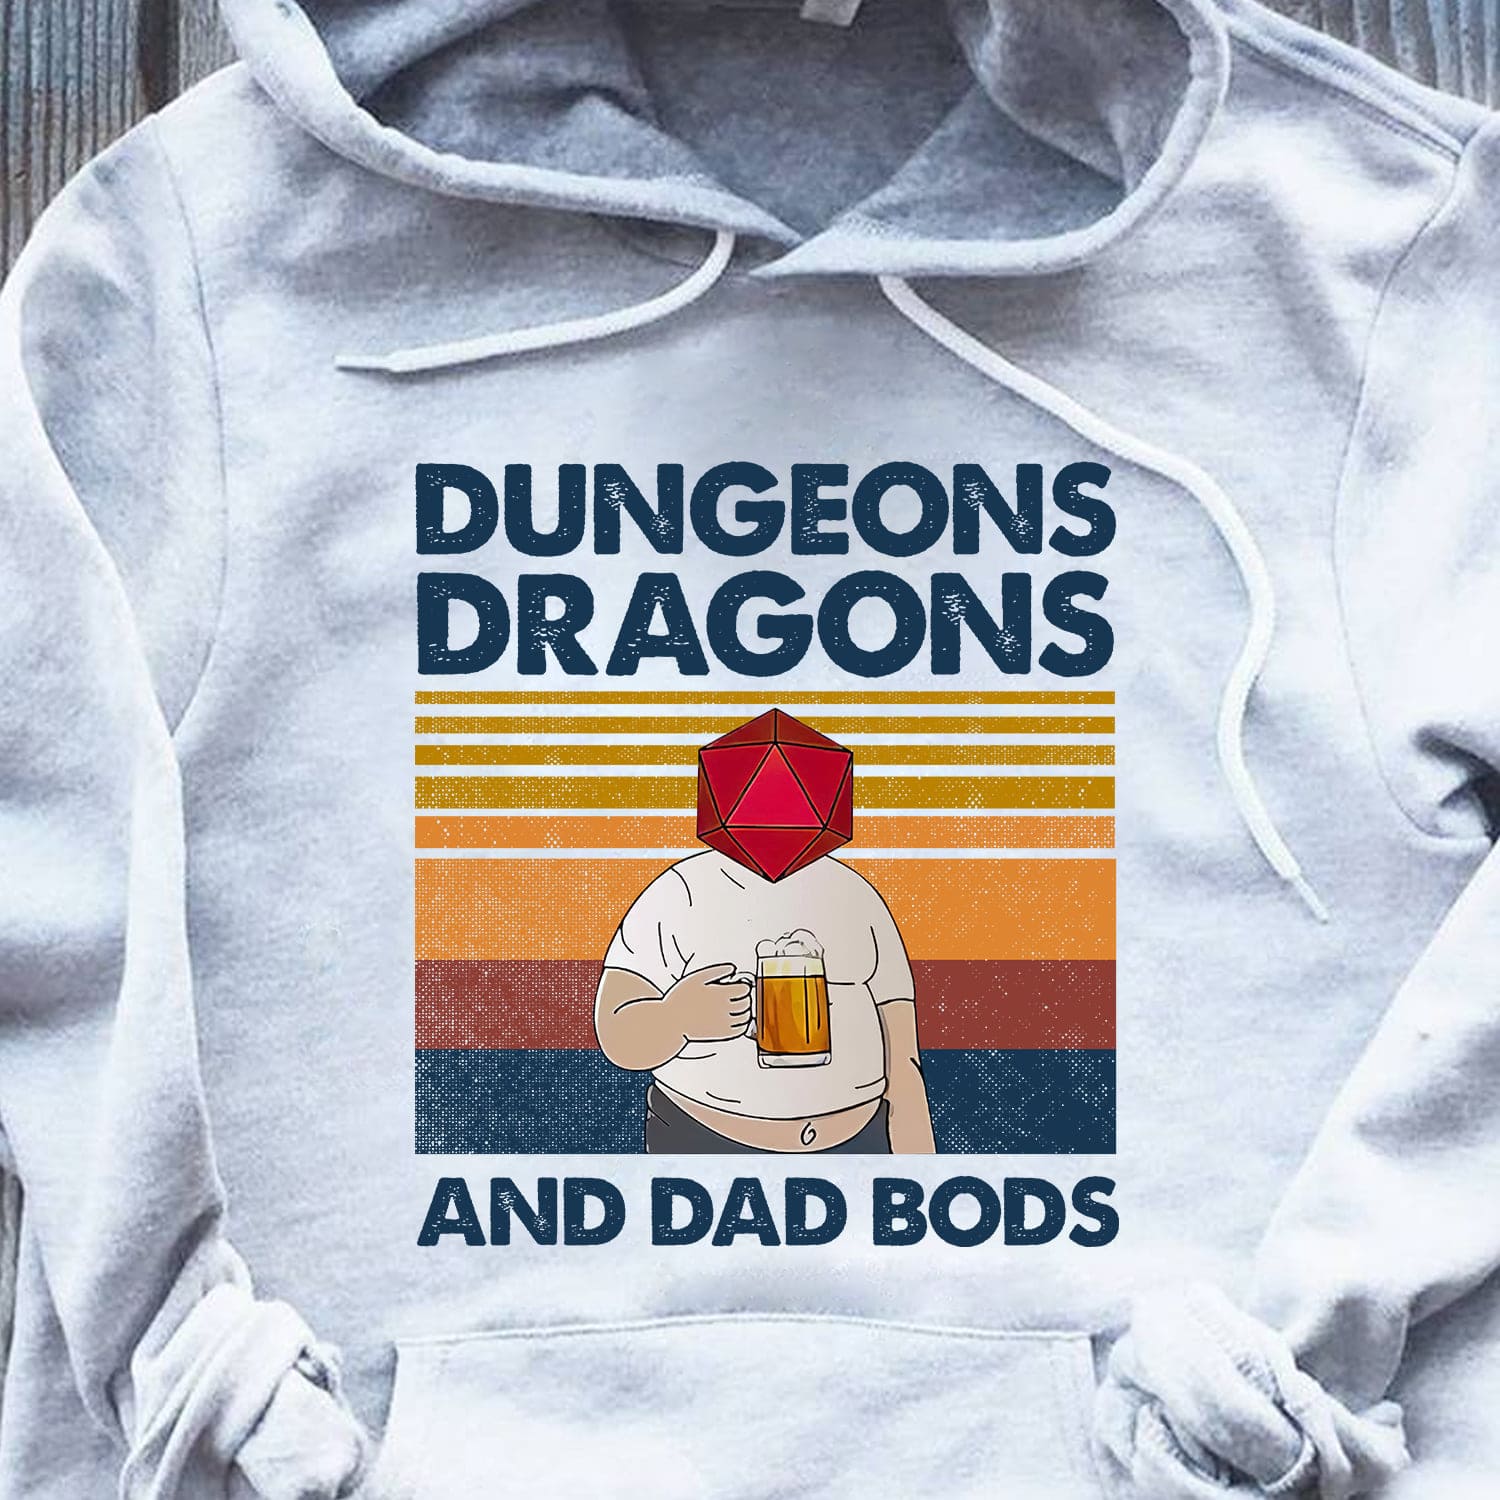 Dungeons Dragons and Dad bods - Dungeons and Dragons, DnD and beer